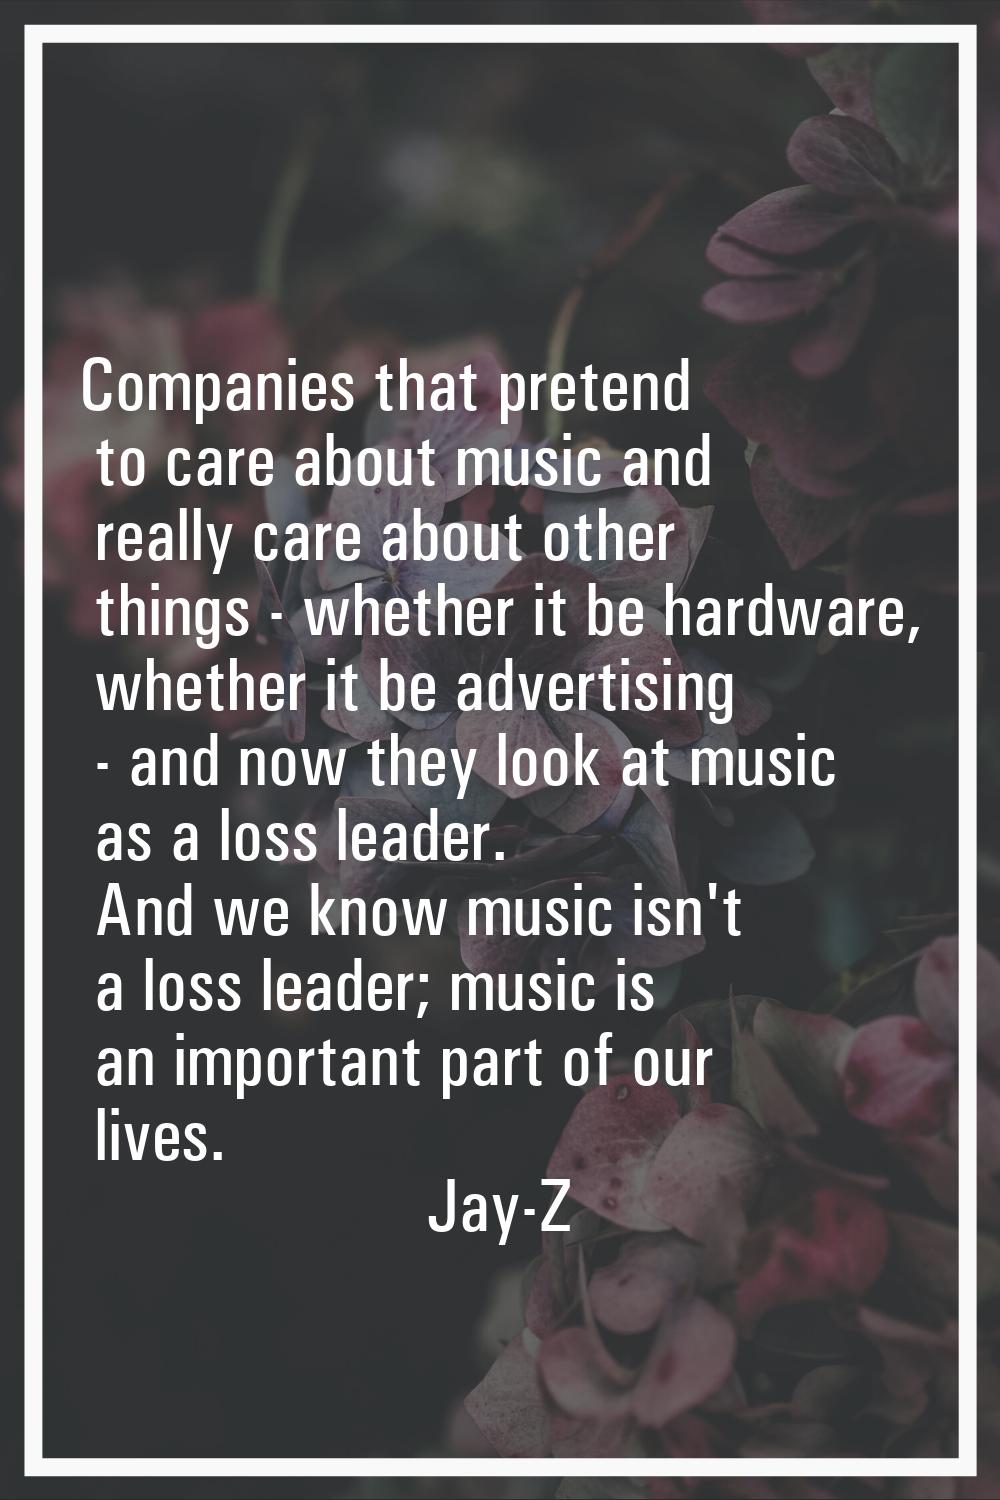 Companies that pretend to care about music and really care about other things - whether it be hardw